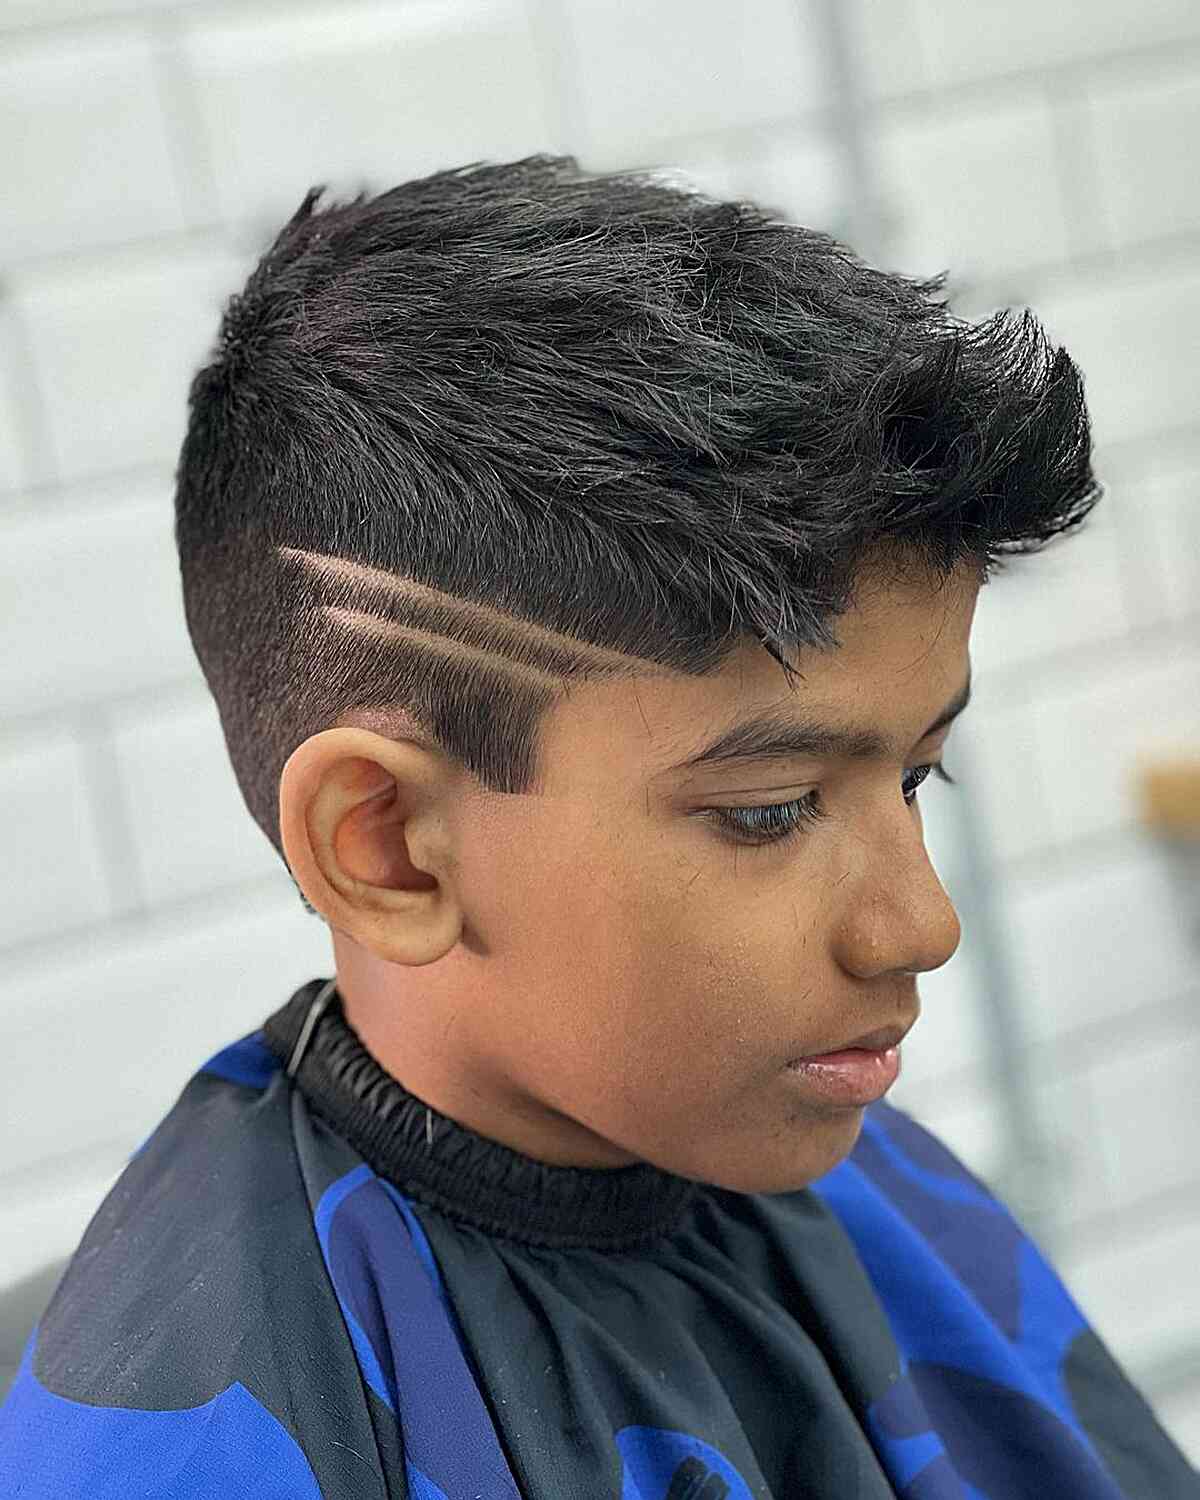 Reveal more than 220 cool hairstyles for boys best